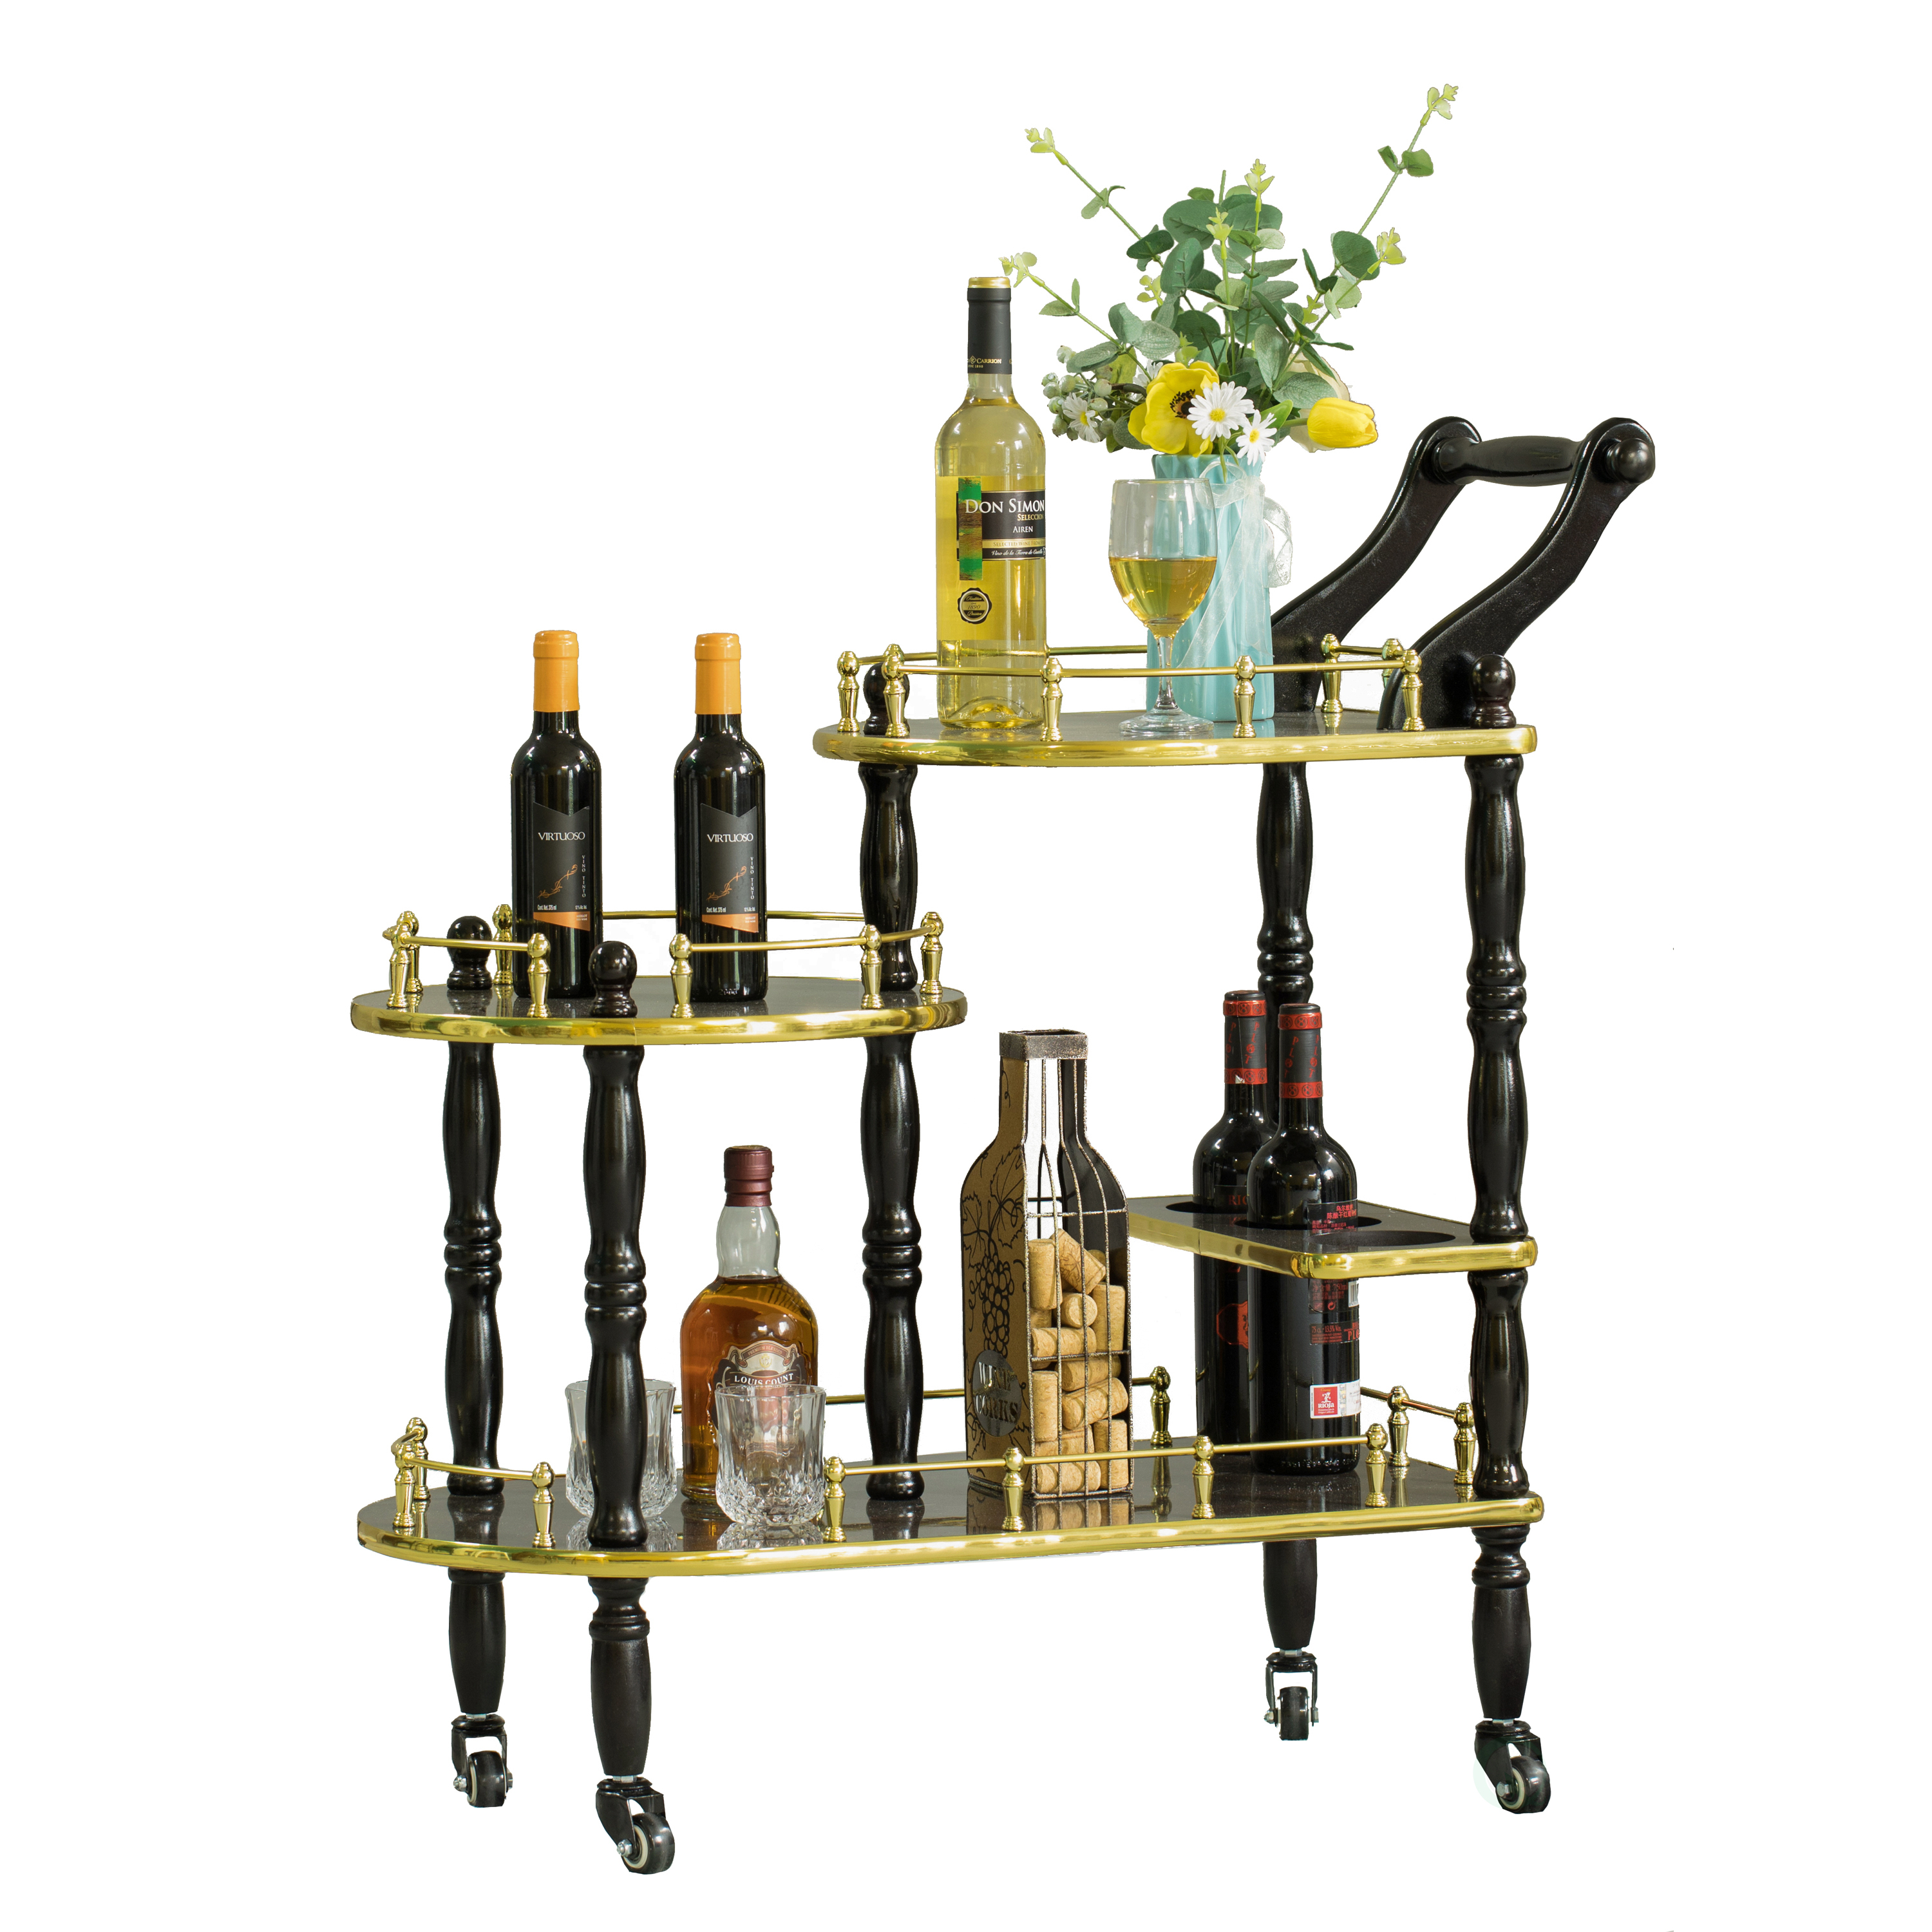 Wood Serving Bar Cart Tea Trolley With 3 Tier Shelves And Rolling Wheels - Brown